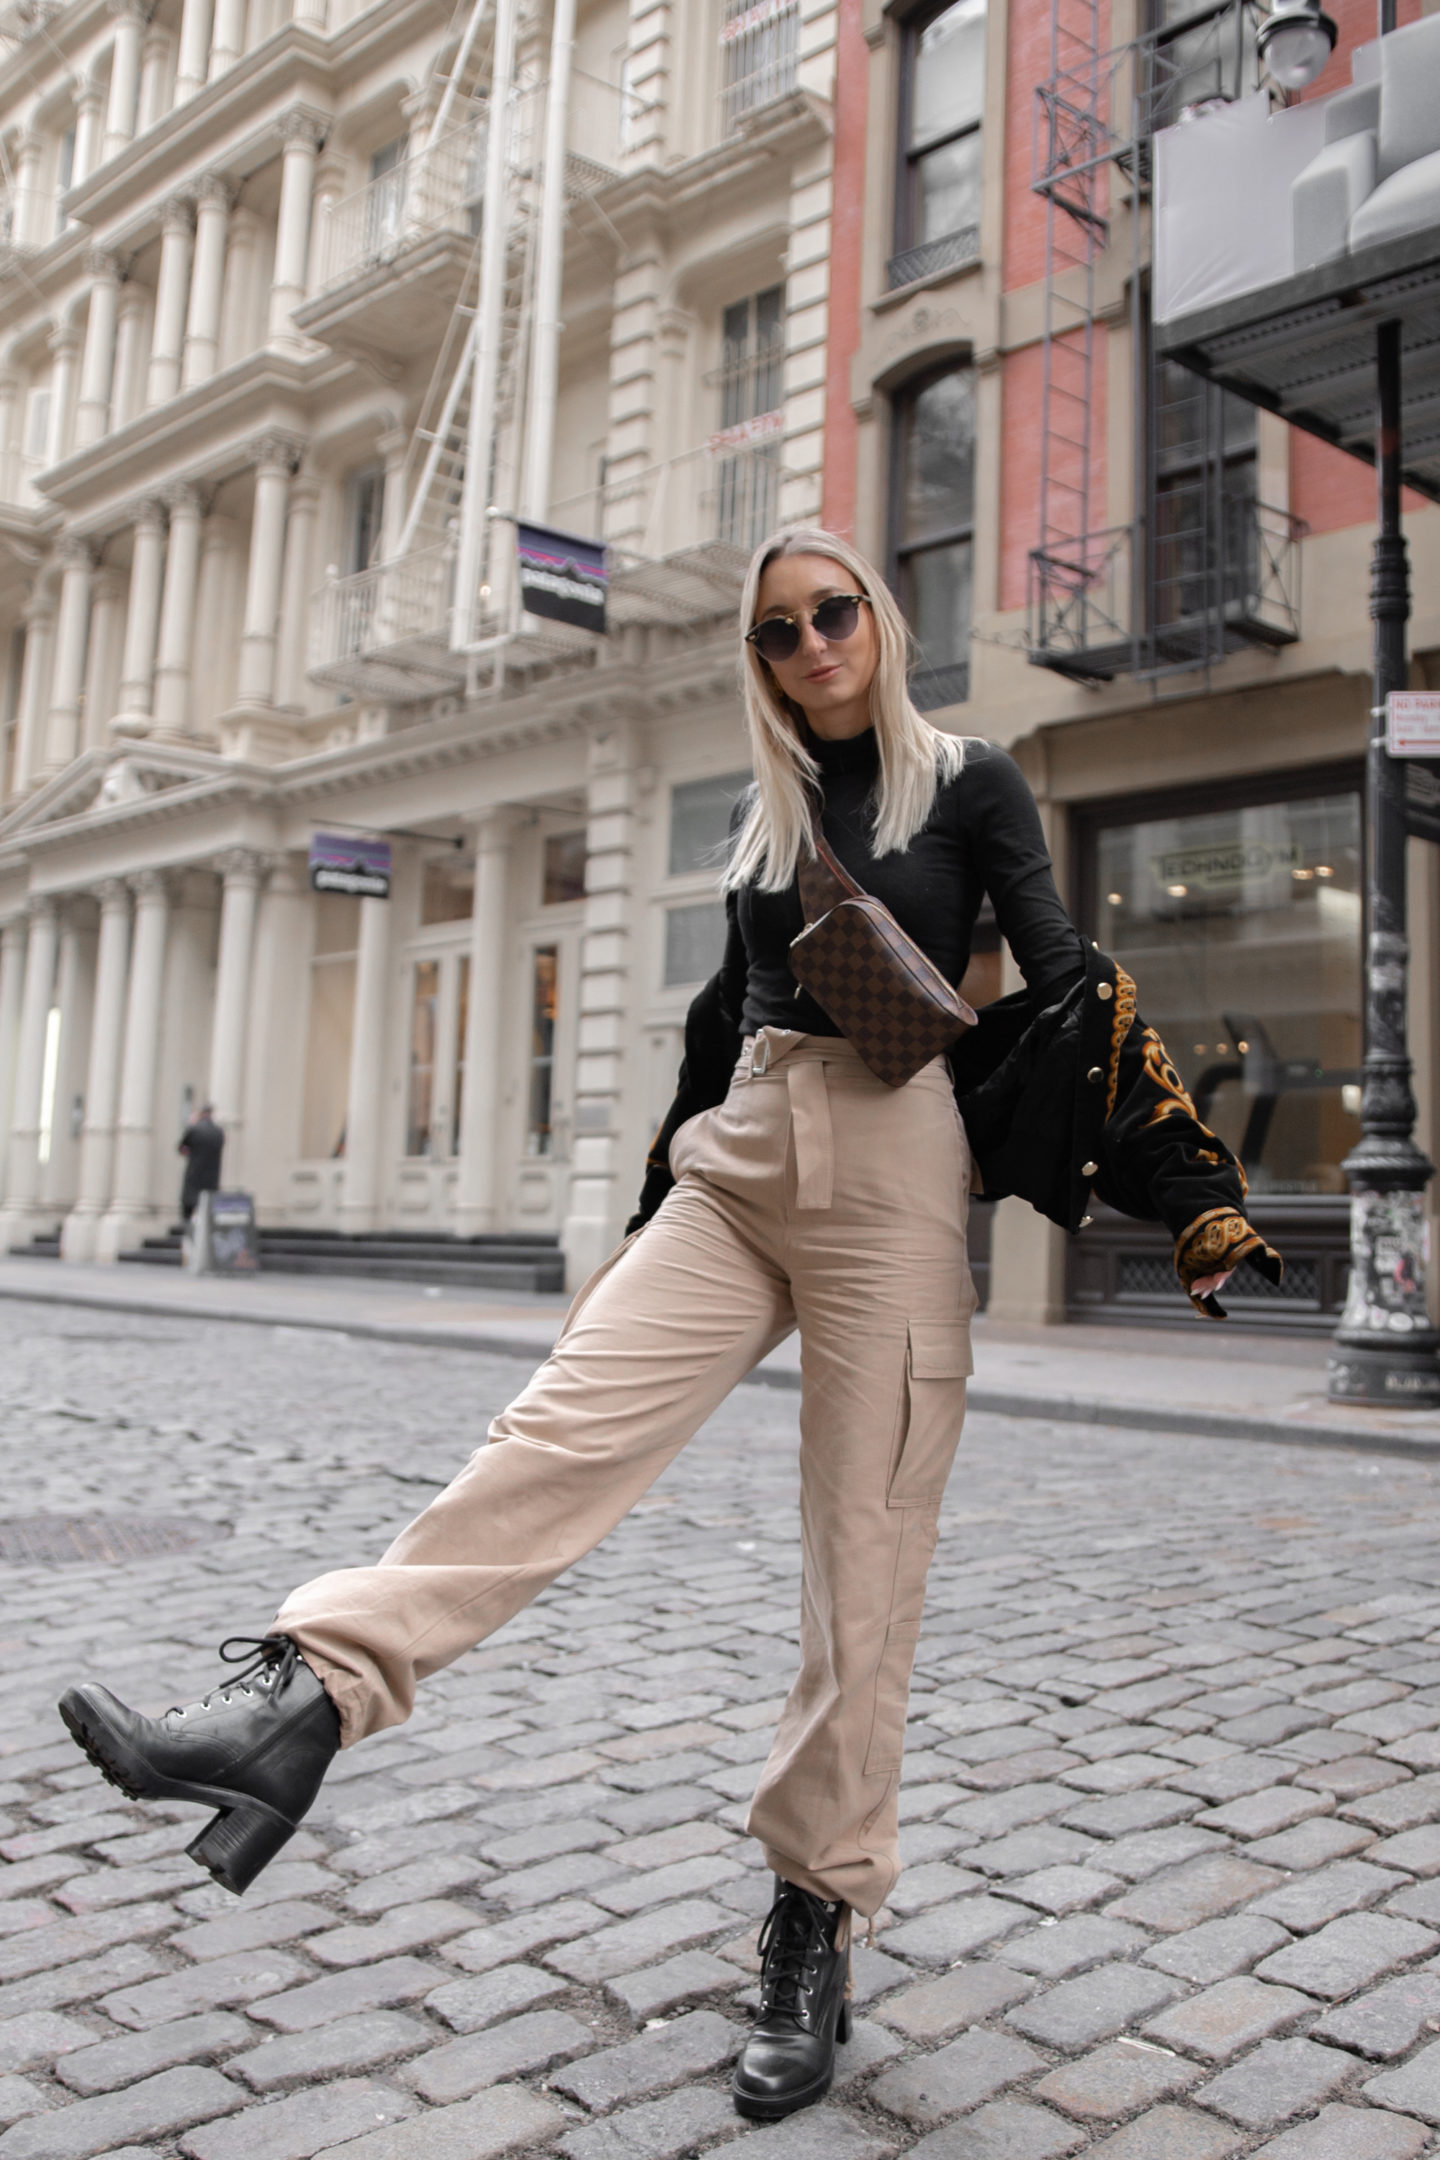 New York Fashion Week Street Style, 10 Places to Take Photos in NYC